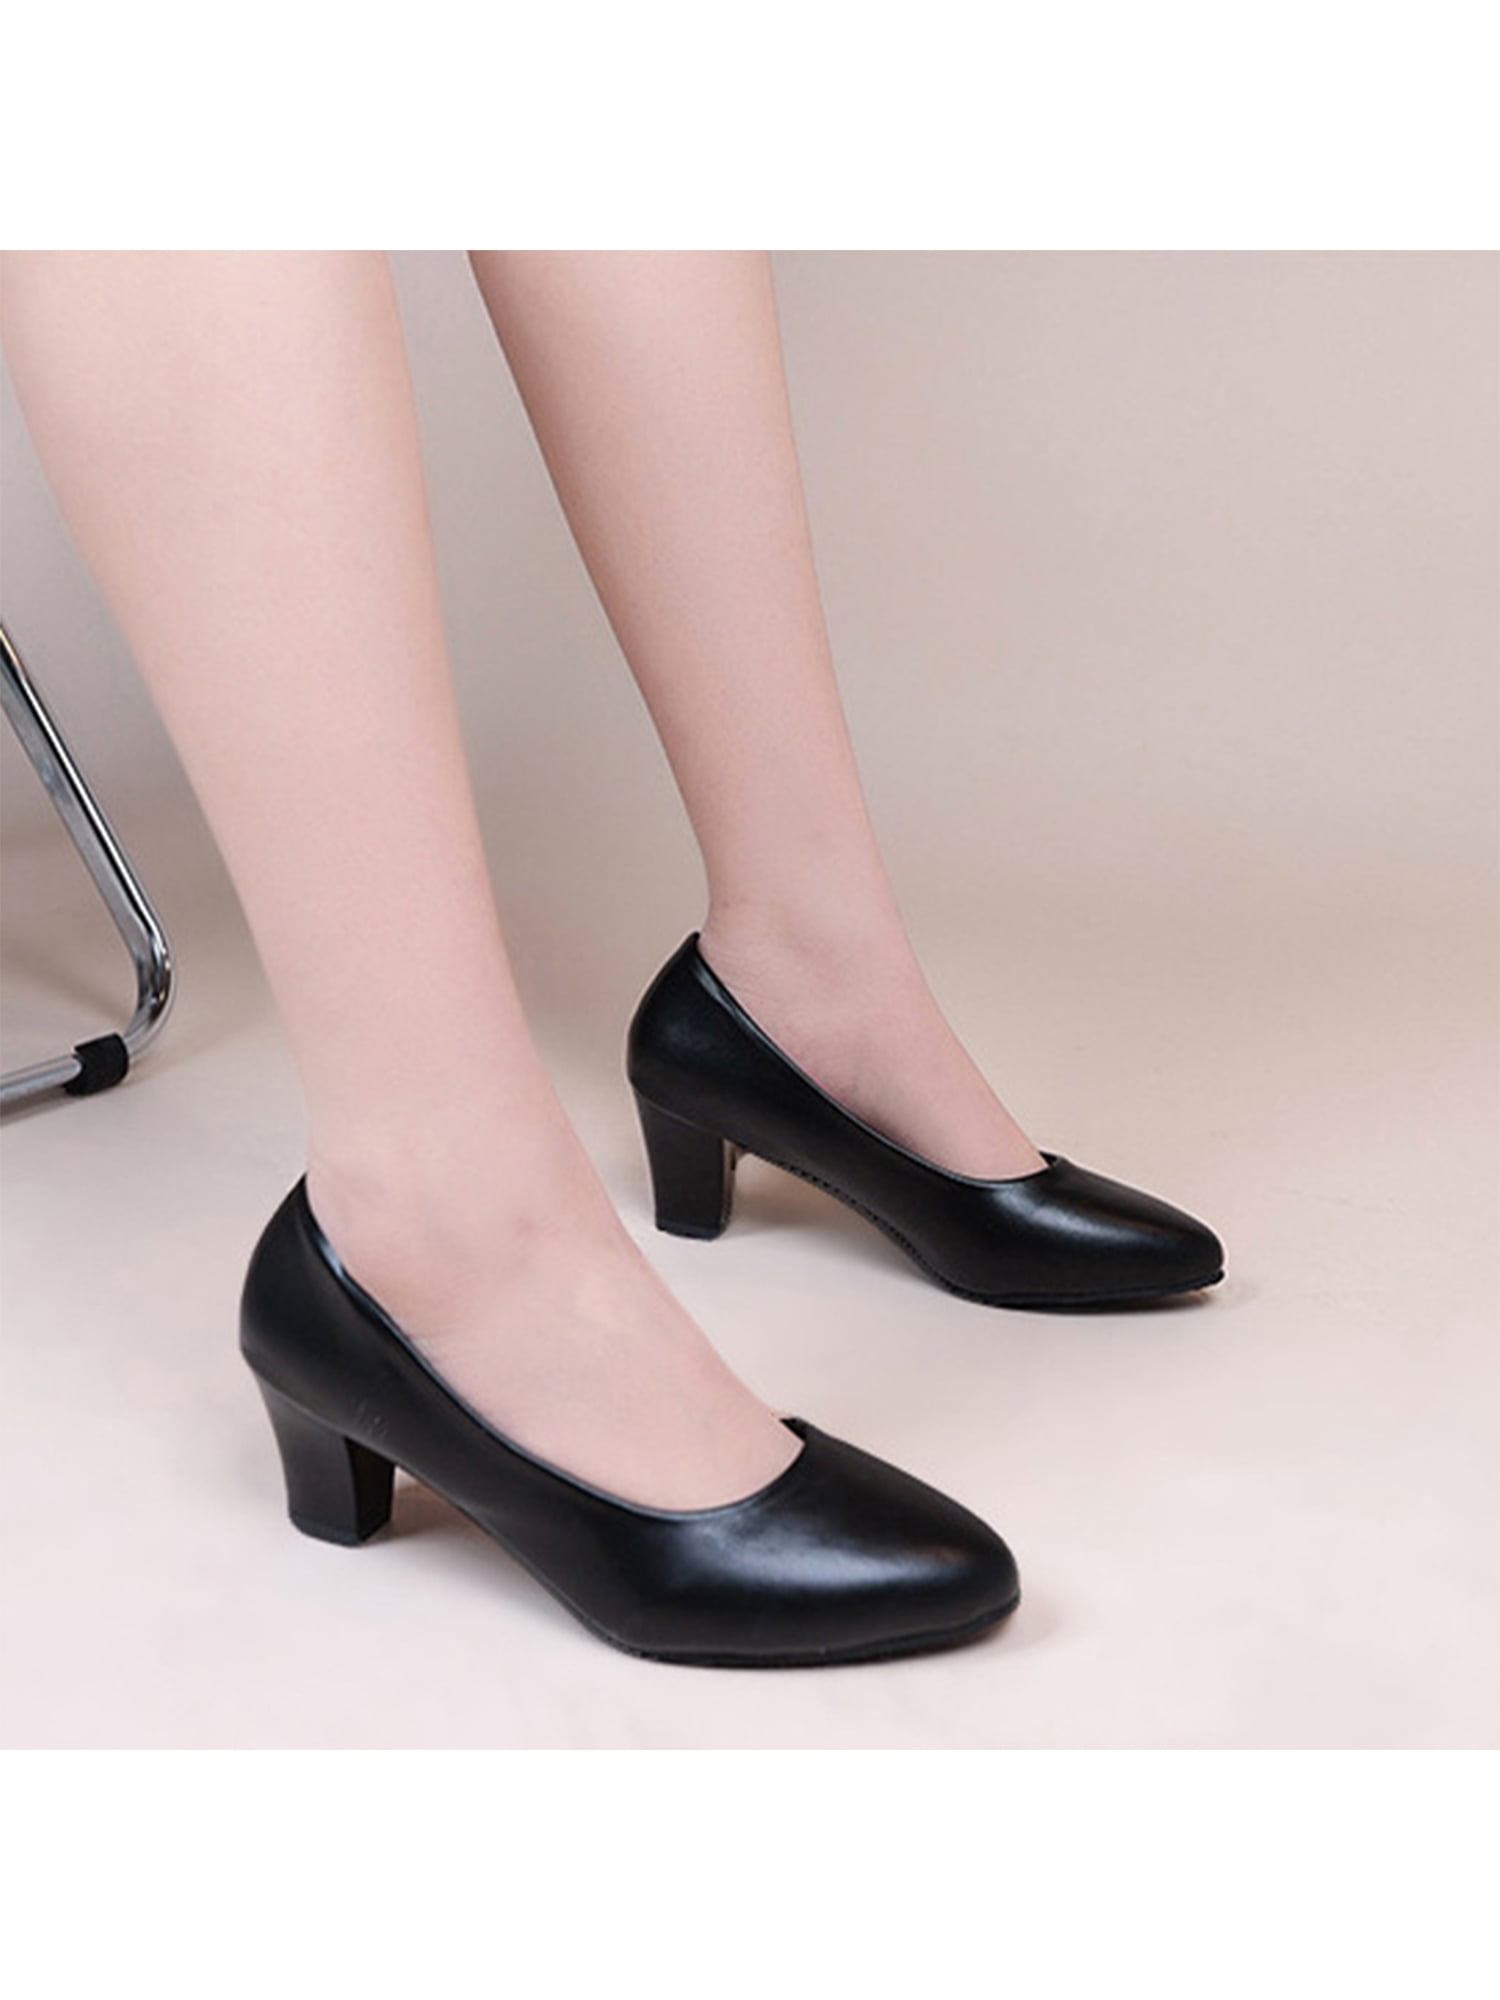 Korean Fashion Simple High Heel Shoes Thin Heel Shallow Mouth Pointed Sexy  Slim Silk Satin Women Shoes Fa1983-1 - China Shoes and Lady Shoe price |  Made-in-China.com